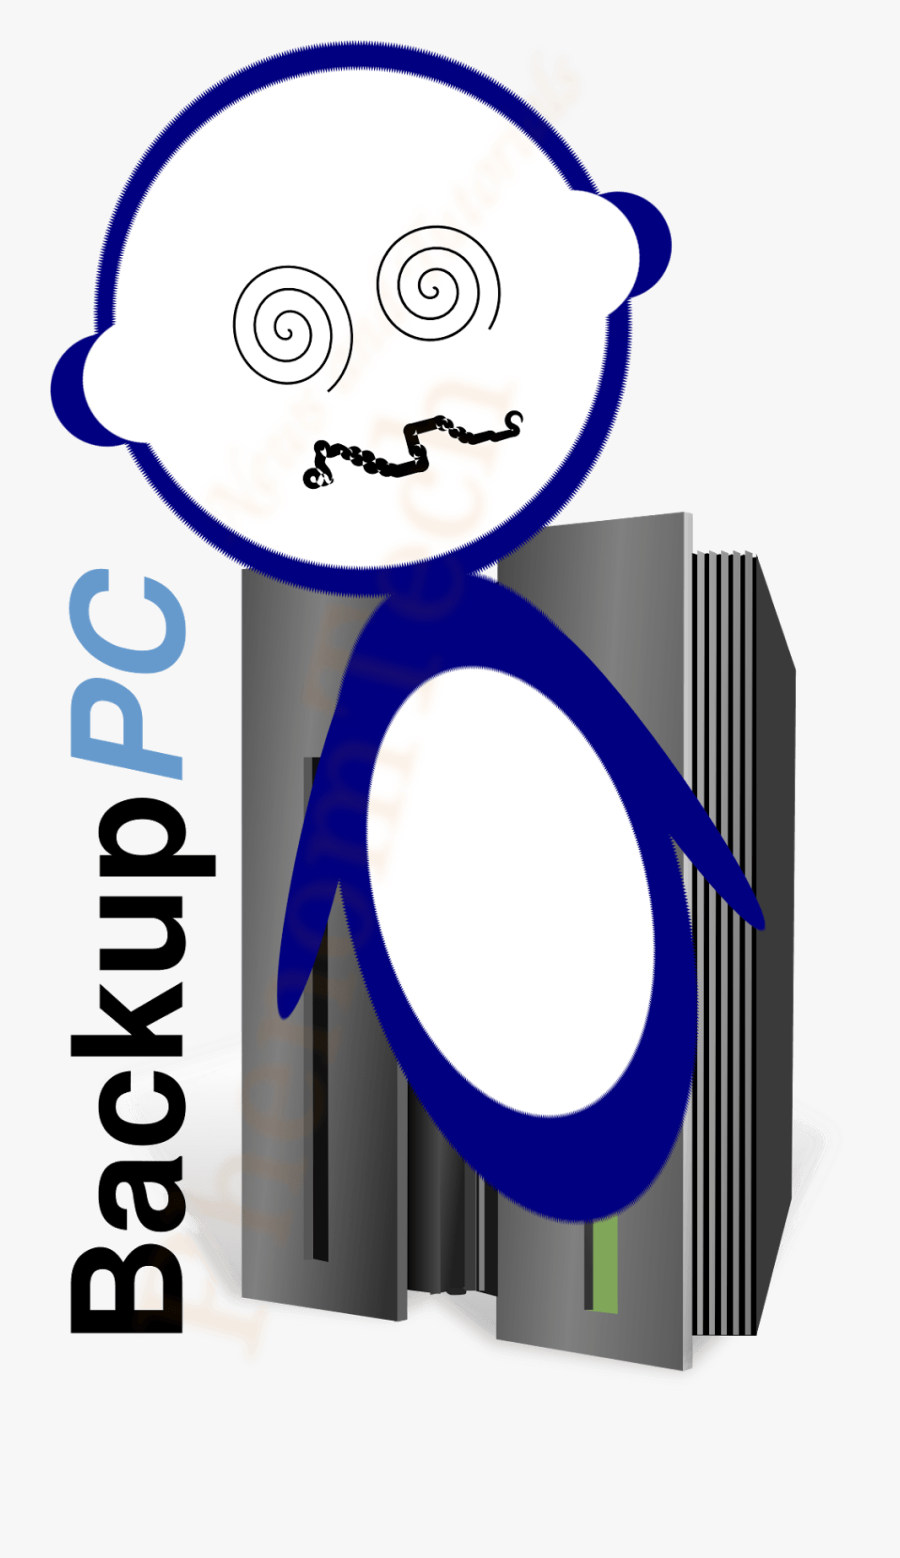 How To Ping Backuppc Hosts Behind A Nat Router Or Firewall, Transparent Clipart